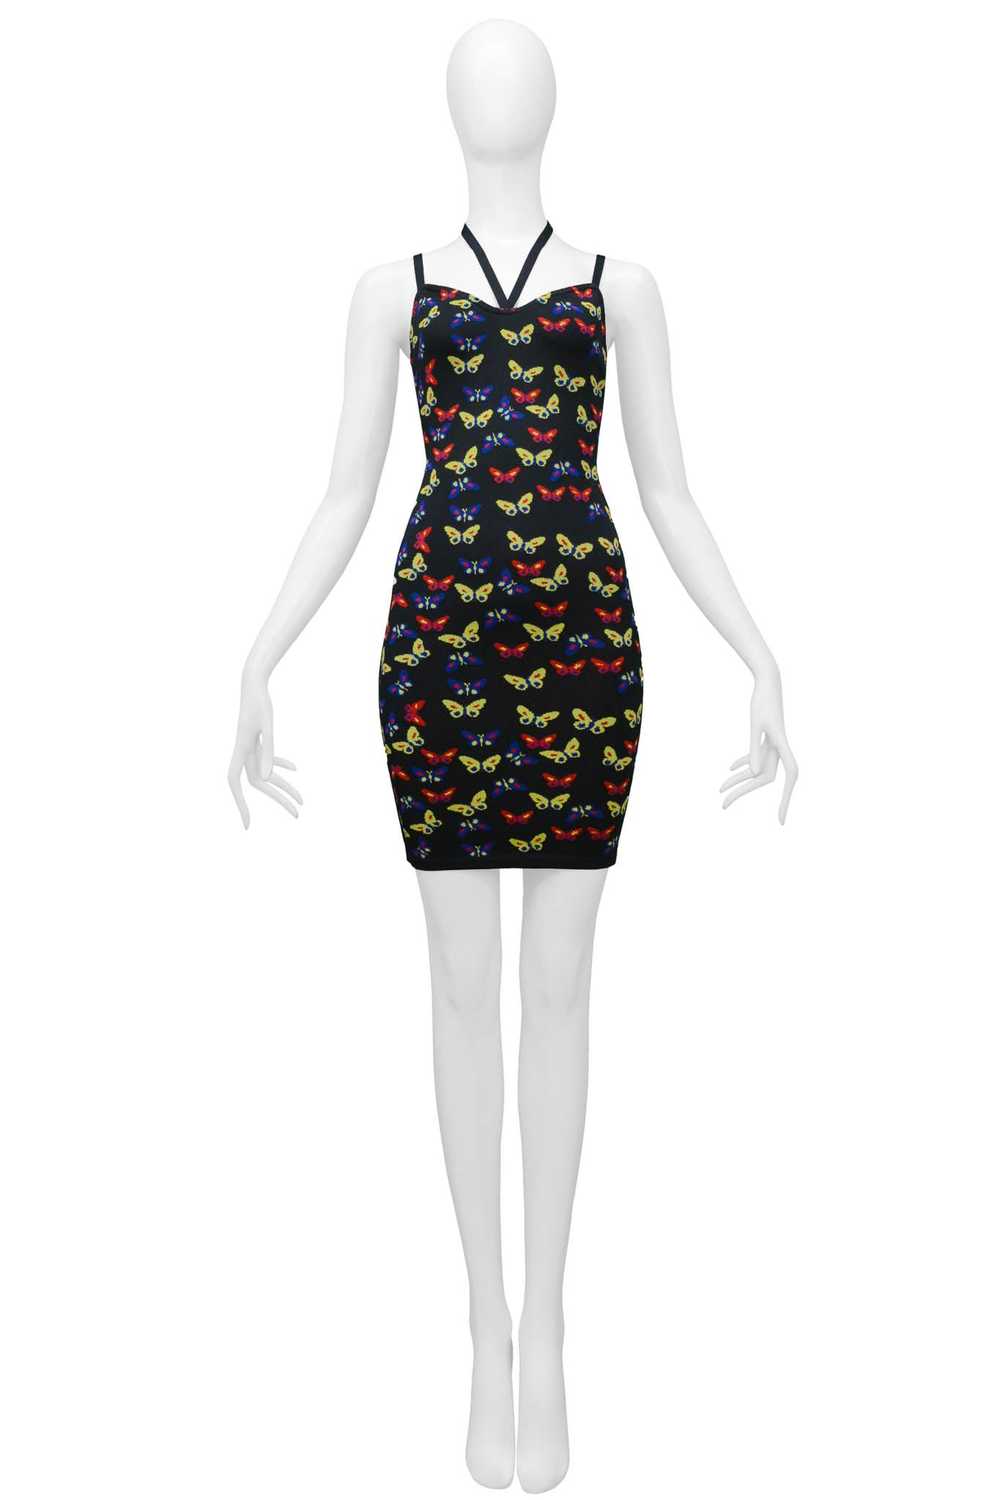 ALAIA ICONIC BUTTERFLY PRINT KNIT DRESS 1991 - image 3